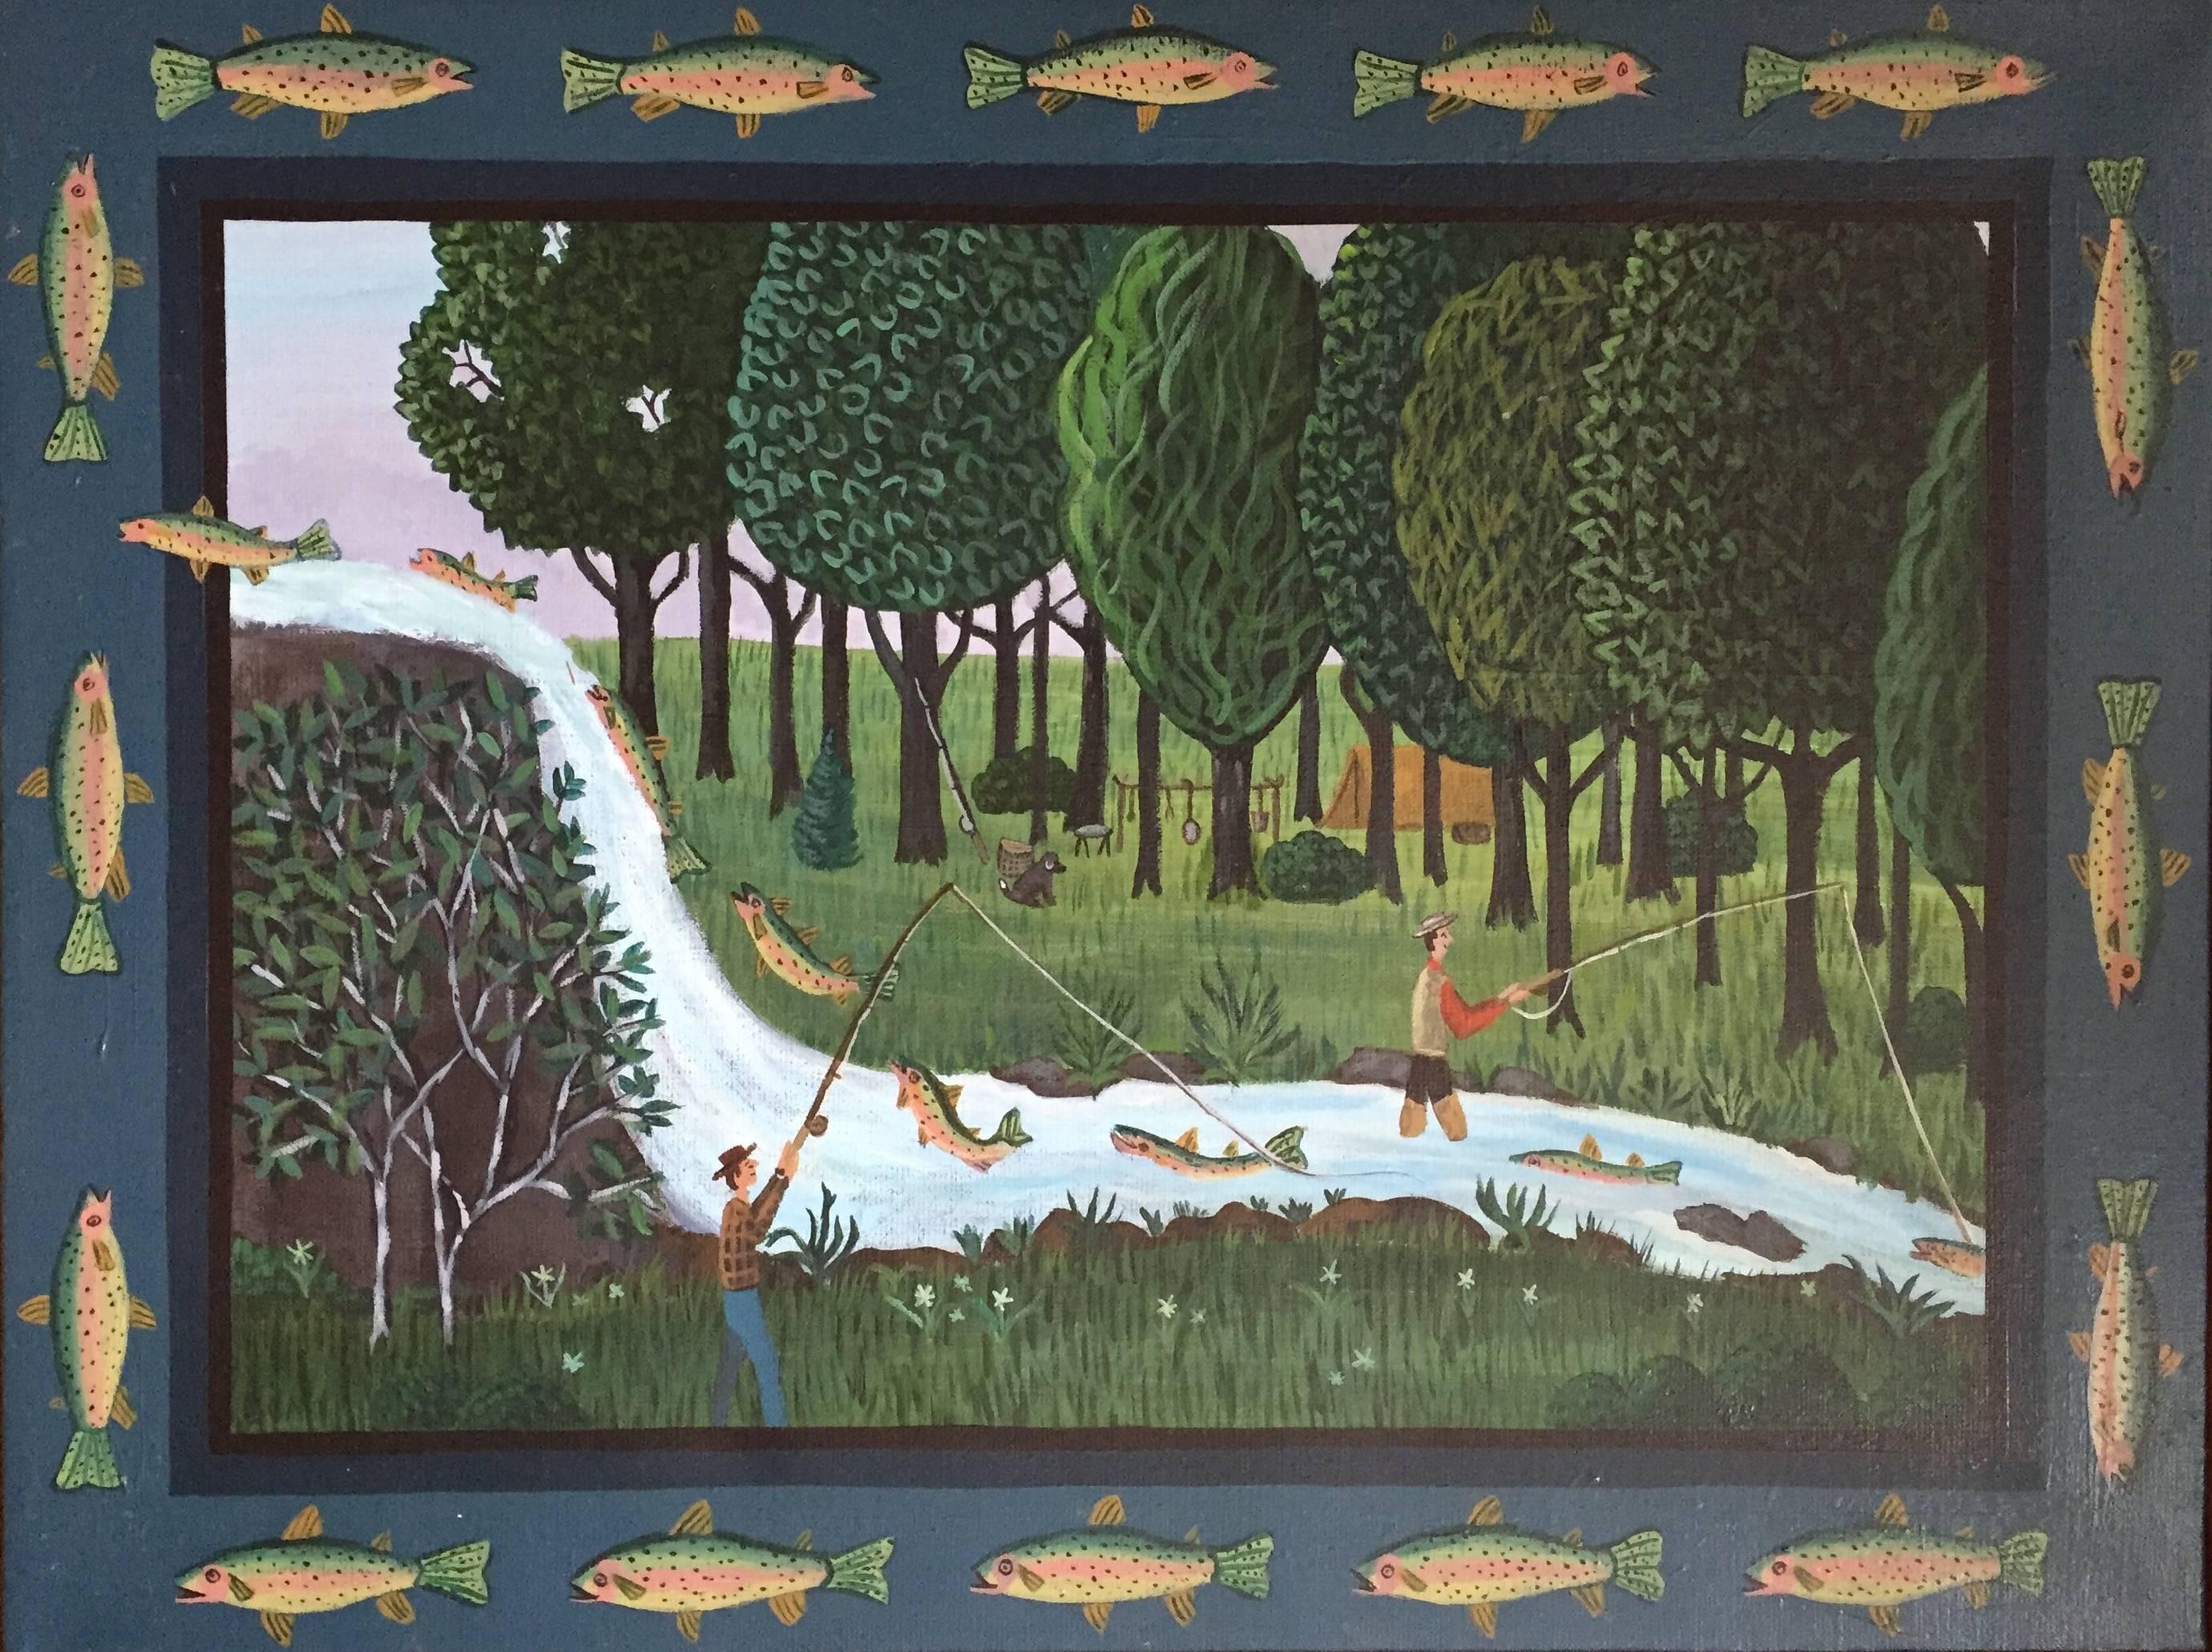 Barbara Chipman Moment Landscape Painting - The Ones That Got Away, "Gone Fishing"